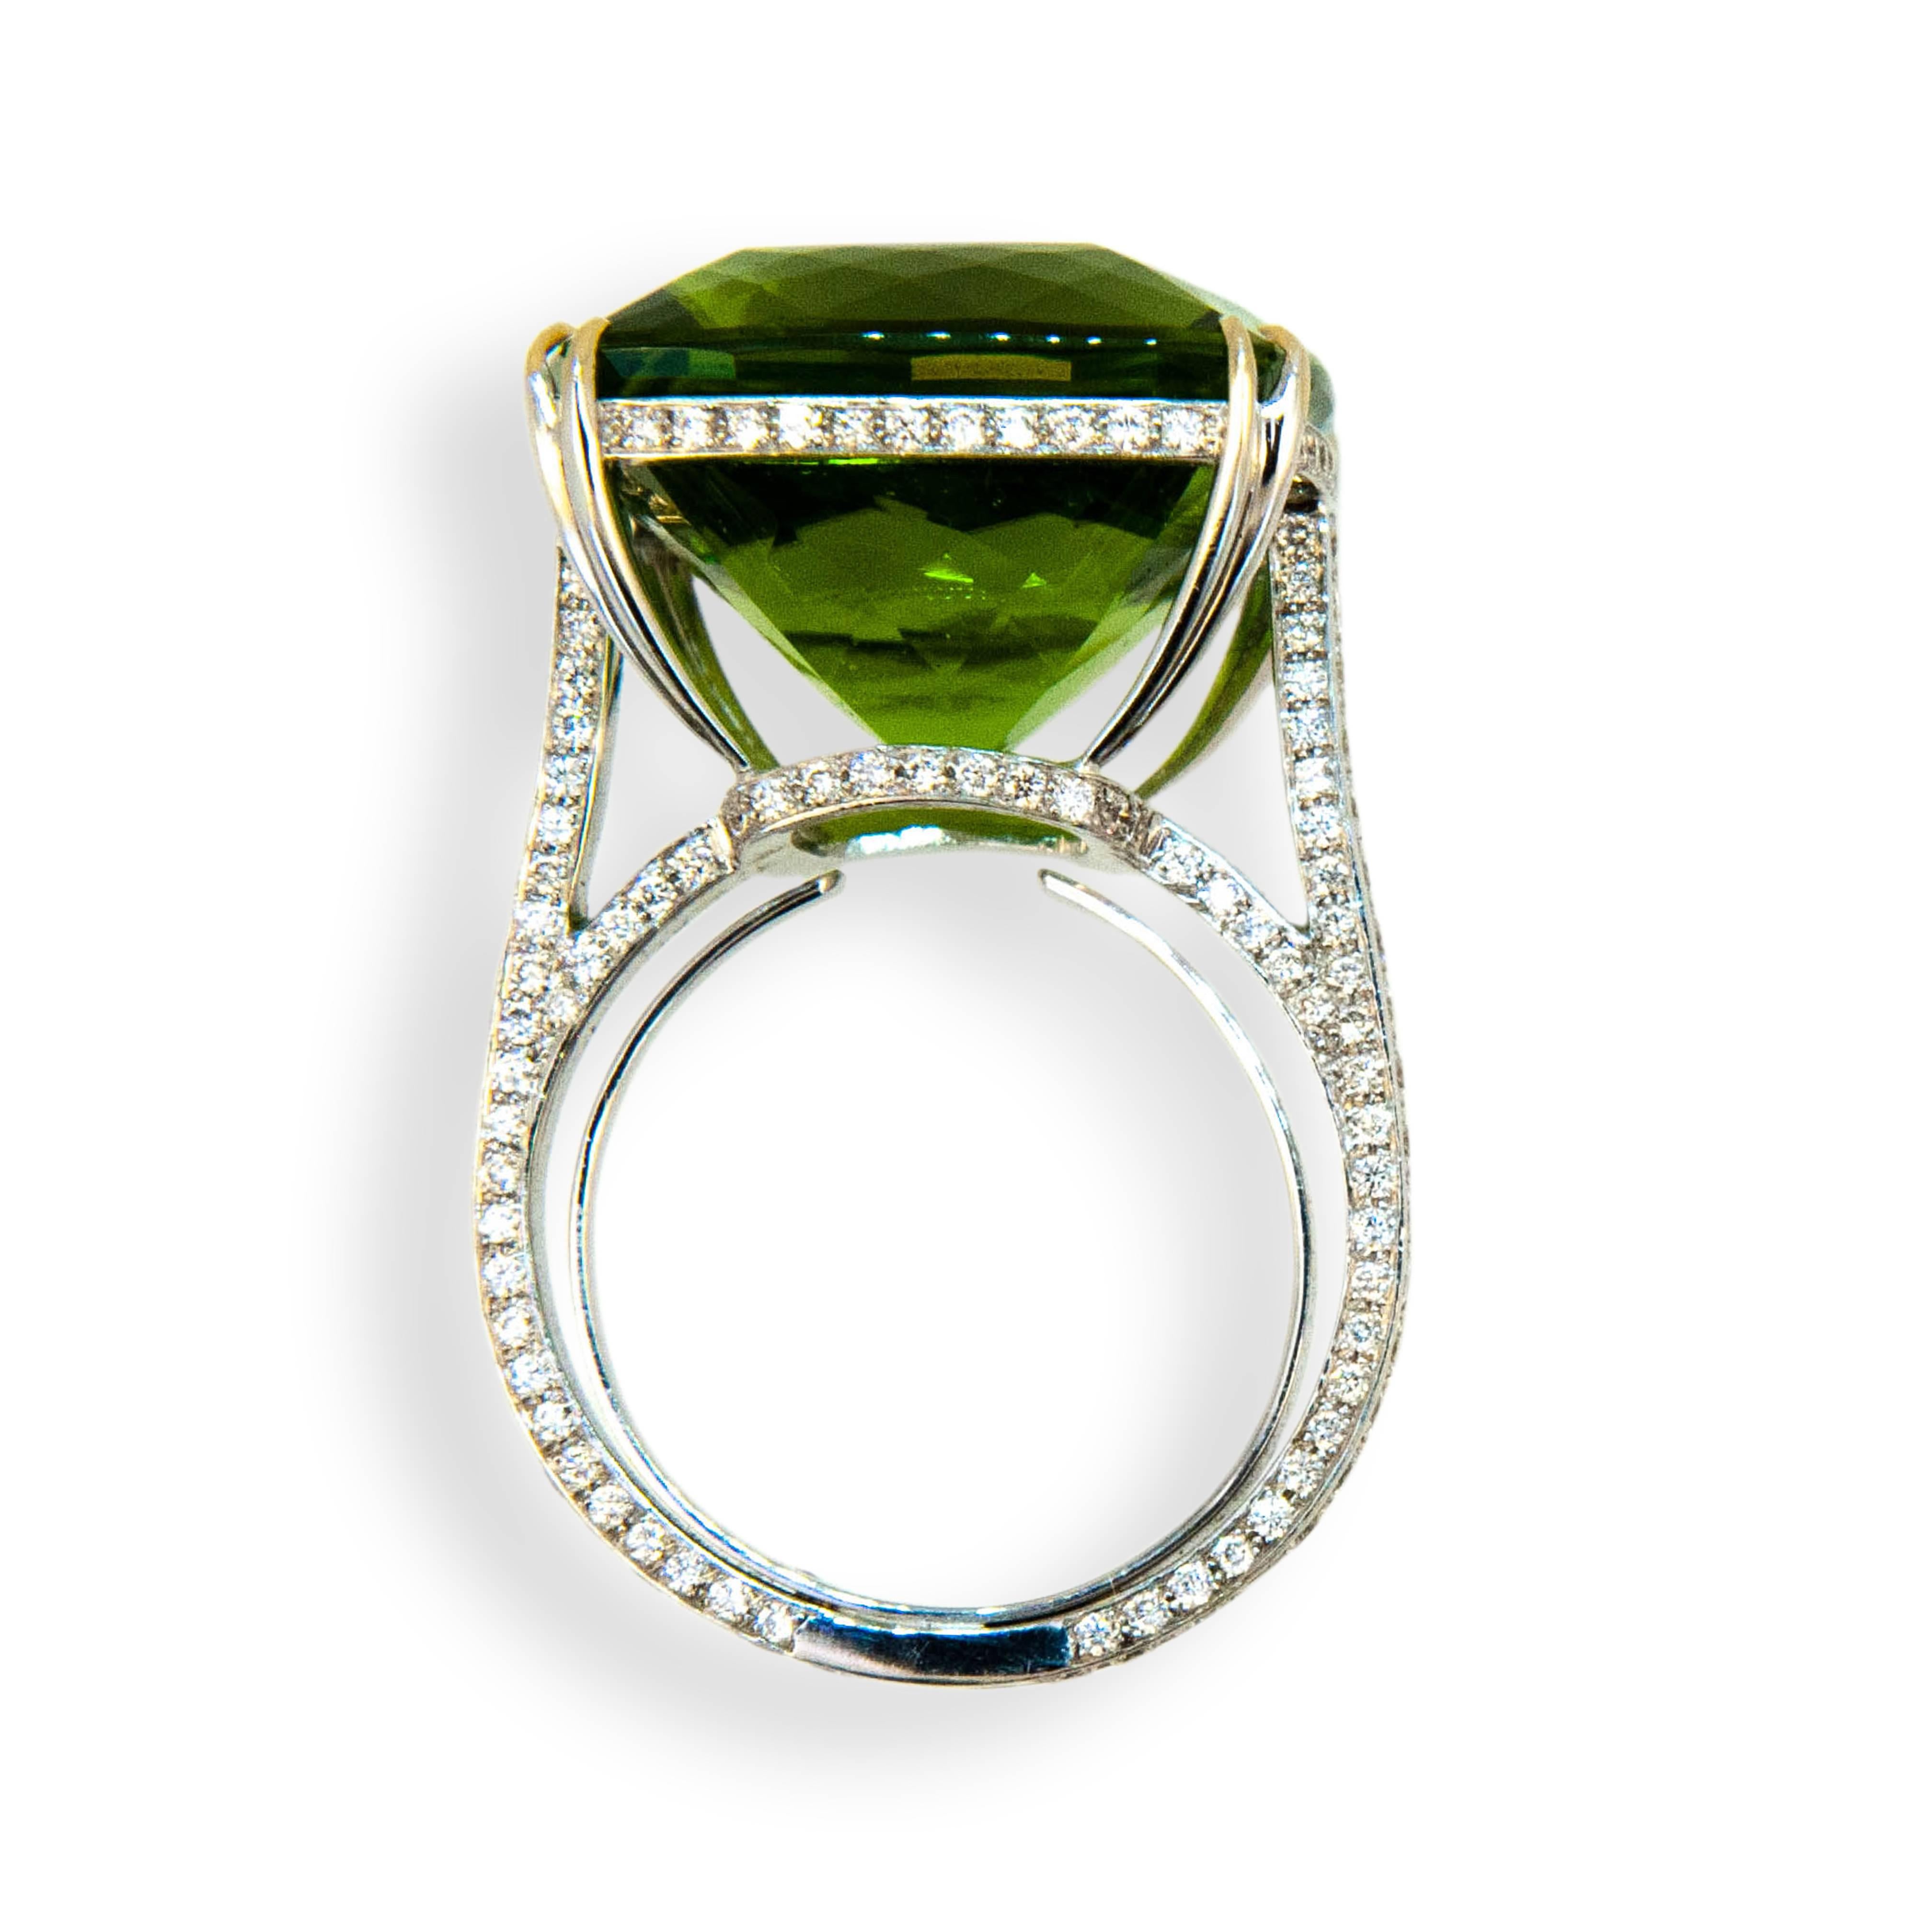 18 karat white gold ring , set in center is one 26.78 carats square faceted cushion cut Peridot. Mounting is set with 226 round diamonds .9-1.4 mm, 1.05 carats total weight. Diamonds are set on under bezel and all sides of shank. Tapered split